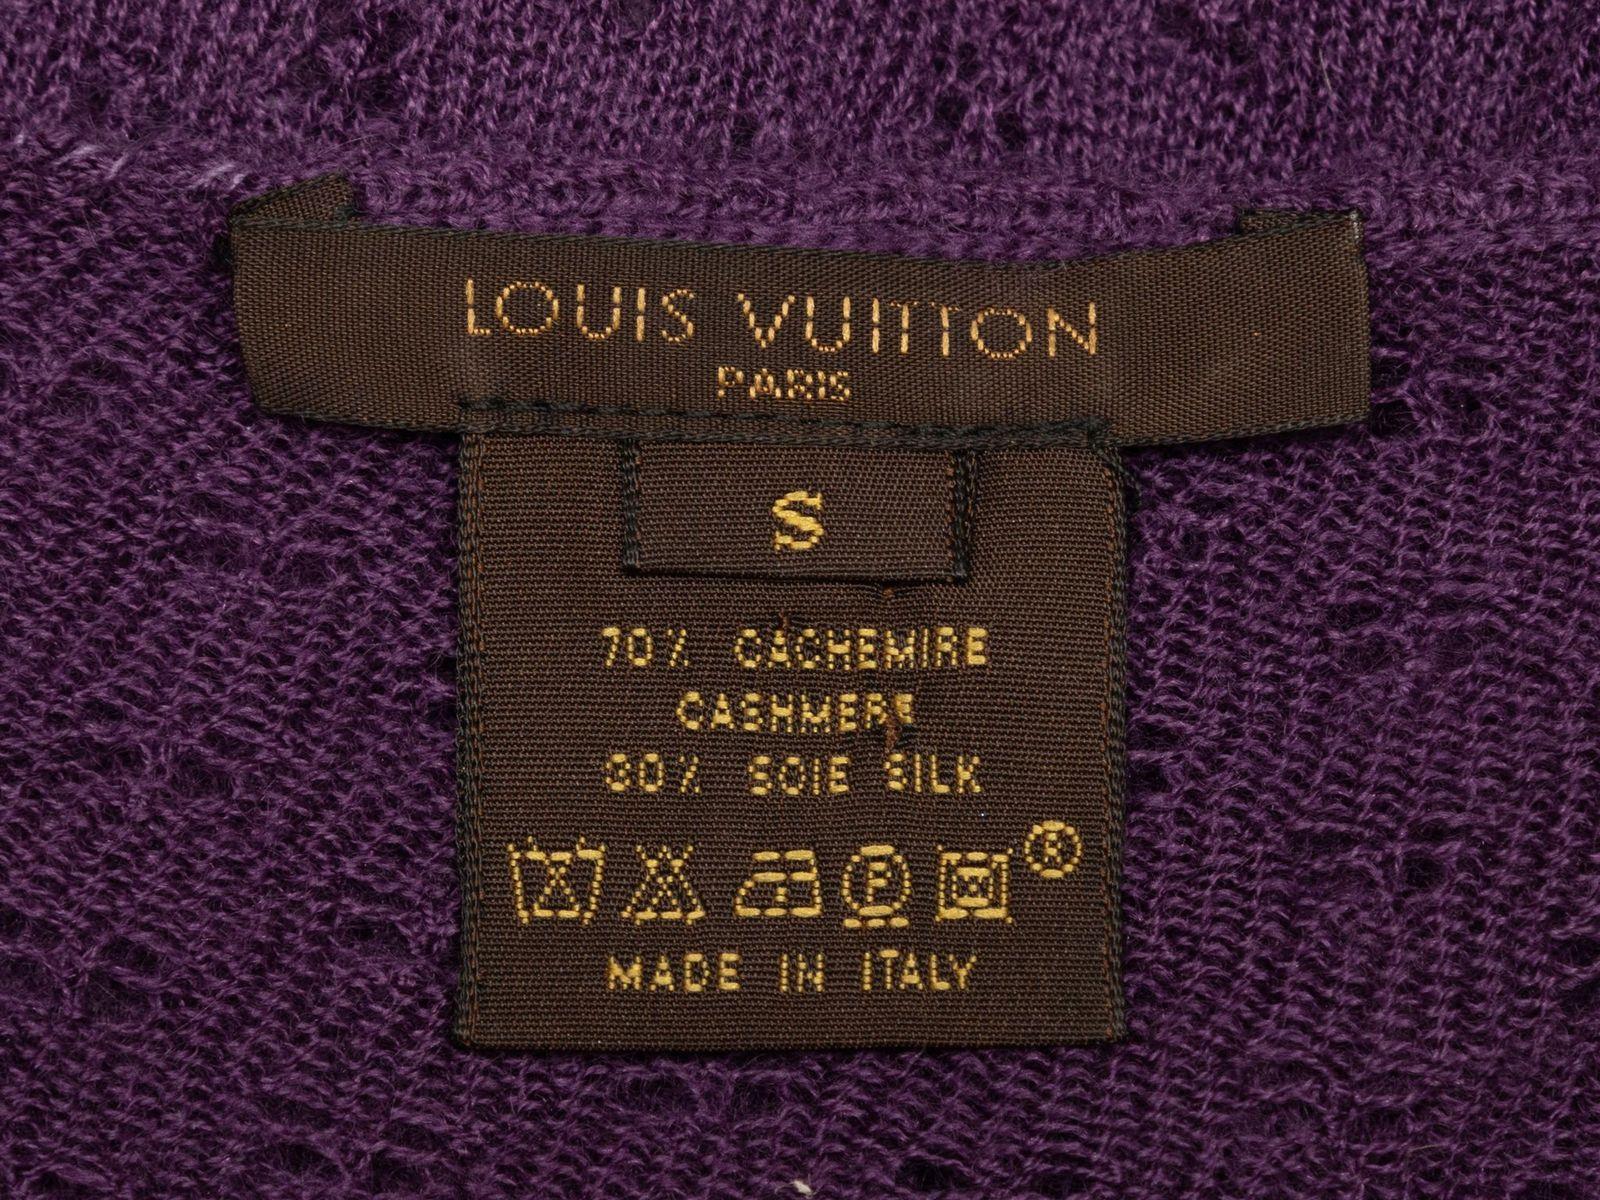 Product Details: Plum cashmere and silk-blend open knit cardigan by Louis Vuitton. Scoop neckline. Button closures at center front. 30